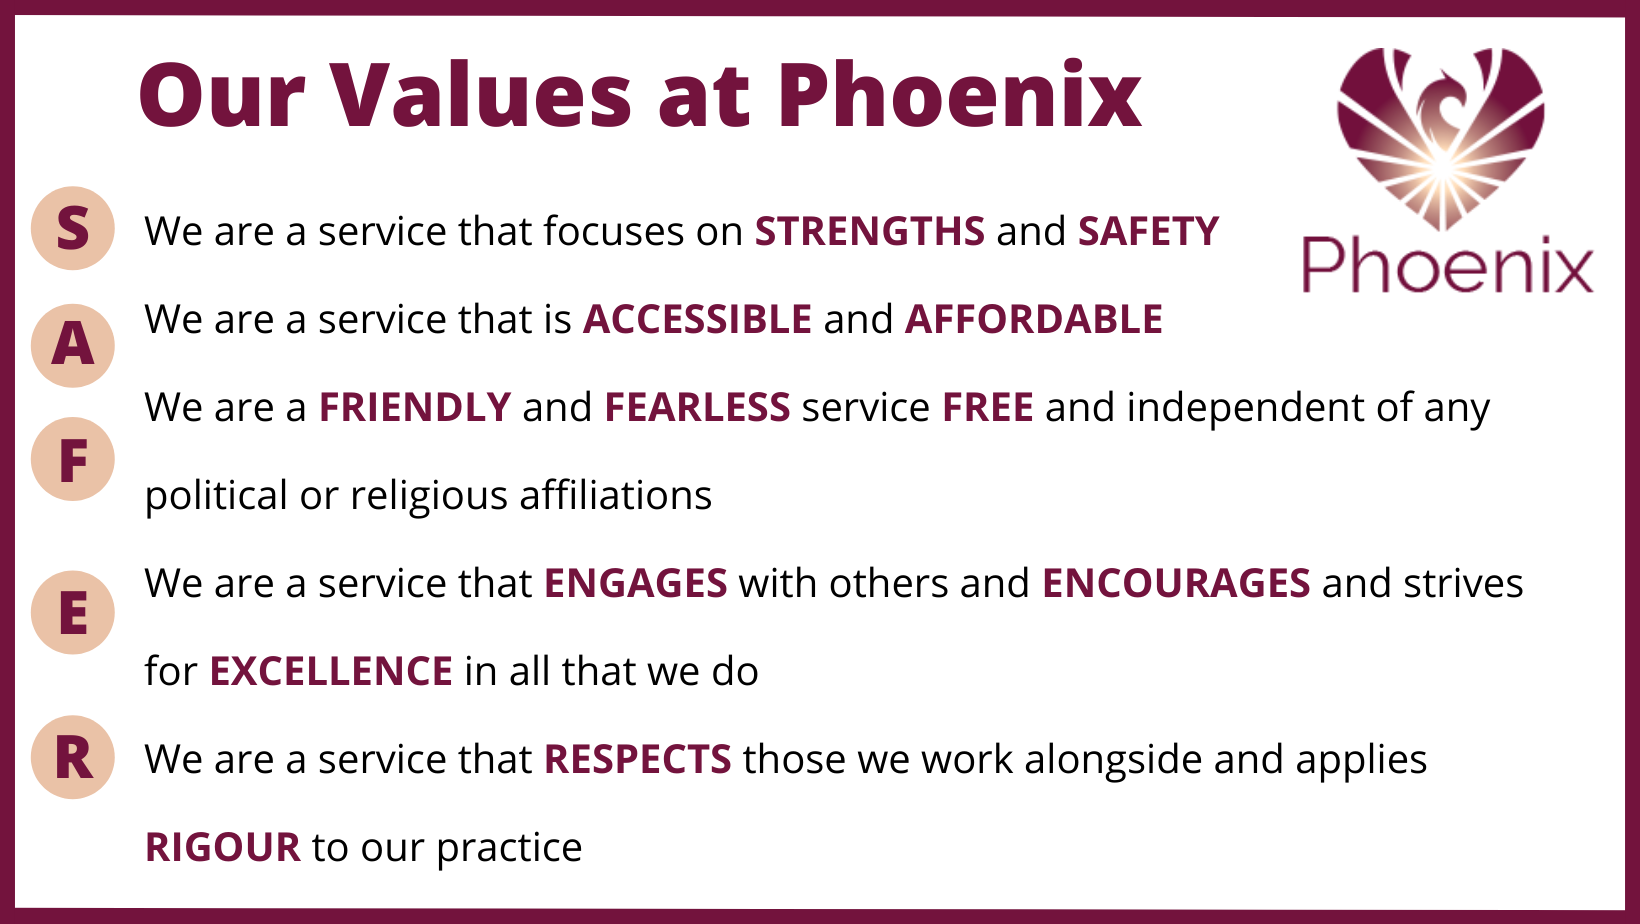 An image graphic that explains the values of Phoenix.